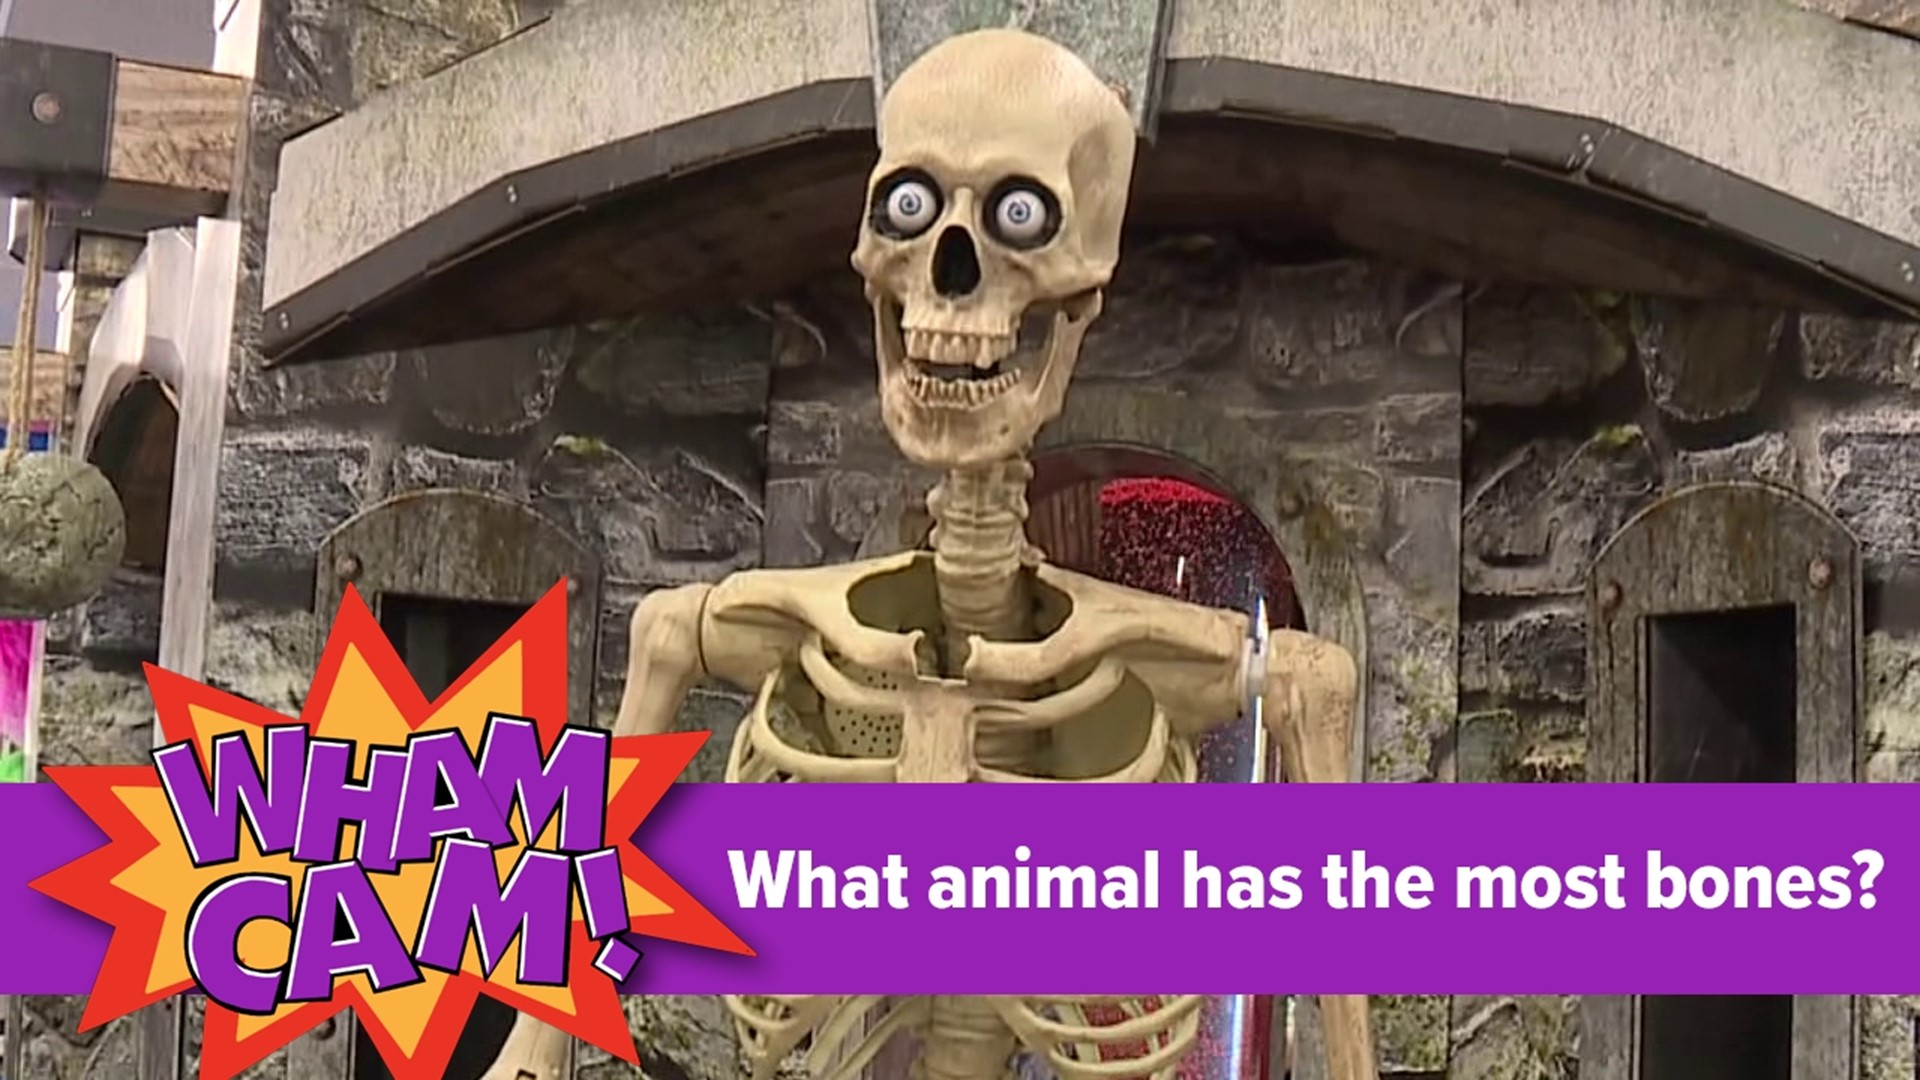 It's now October & Joe's thinking "skeletons." He wants to know what animal has the most number of bones. So he went to Spirit Halloween in Dickson City to find out.